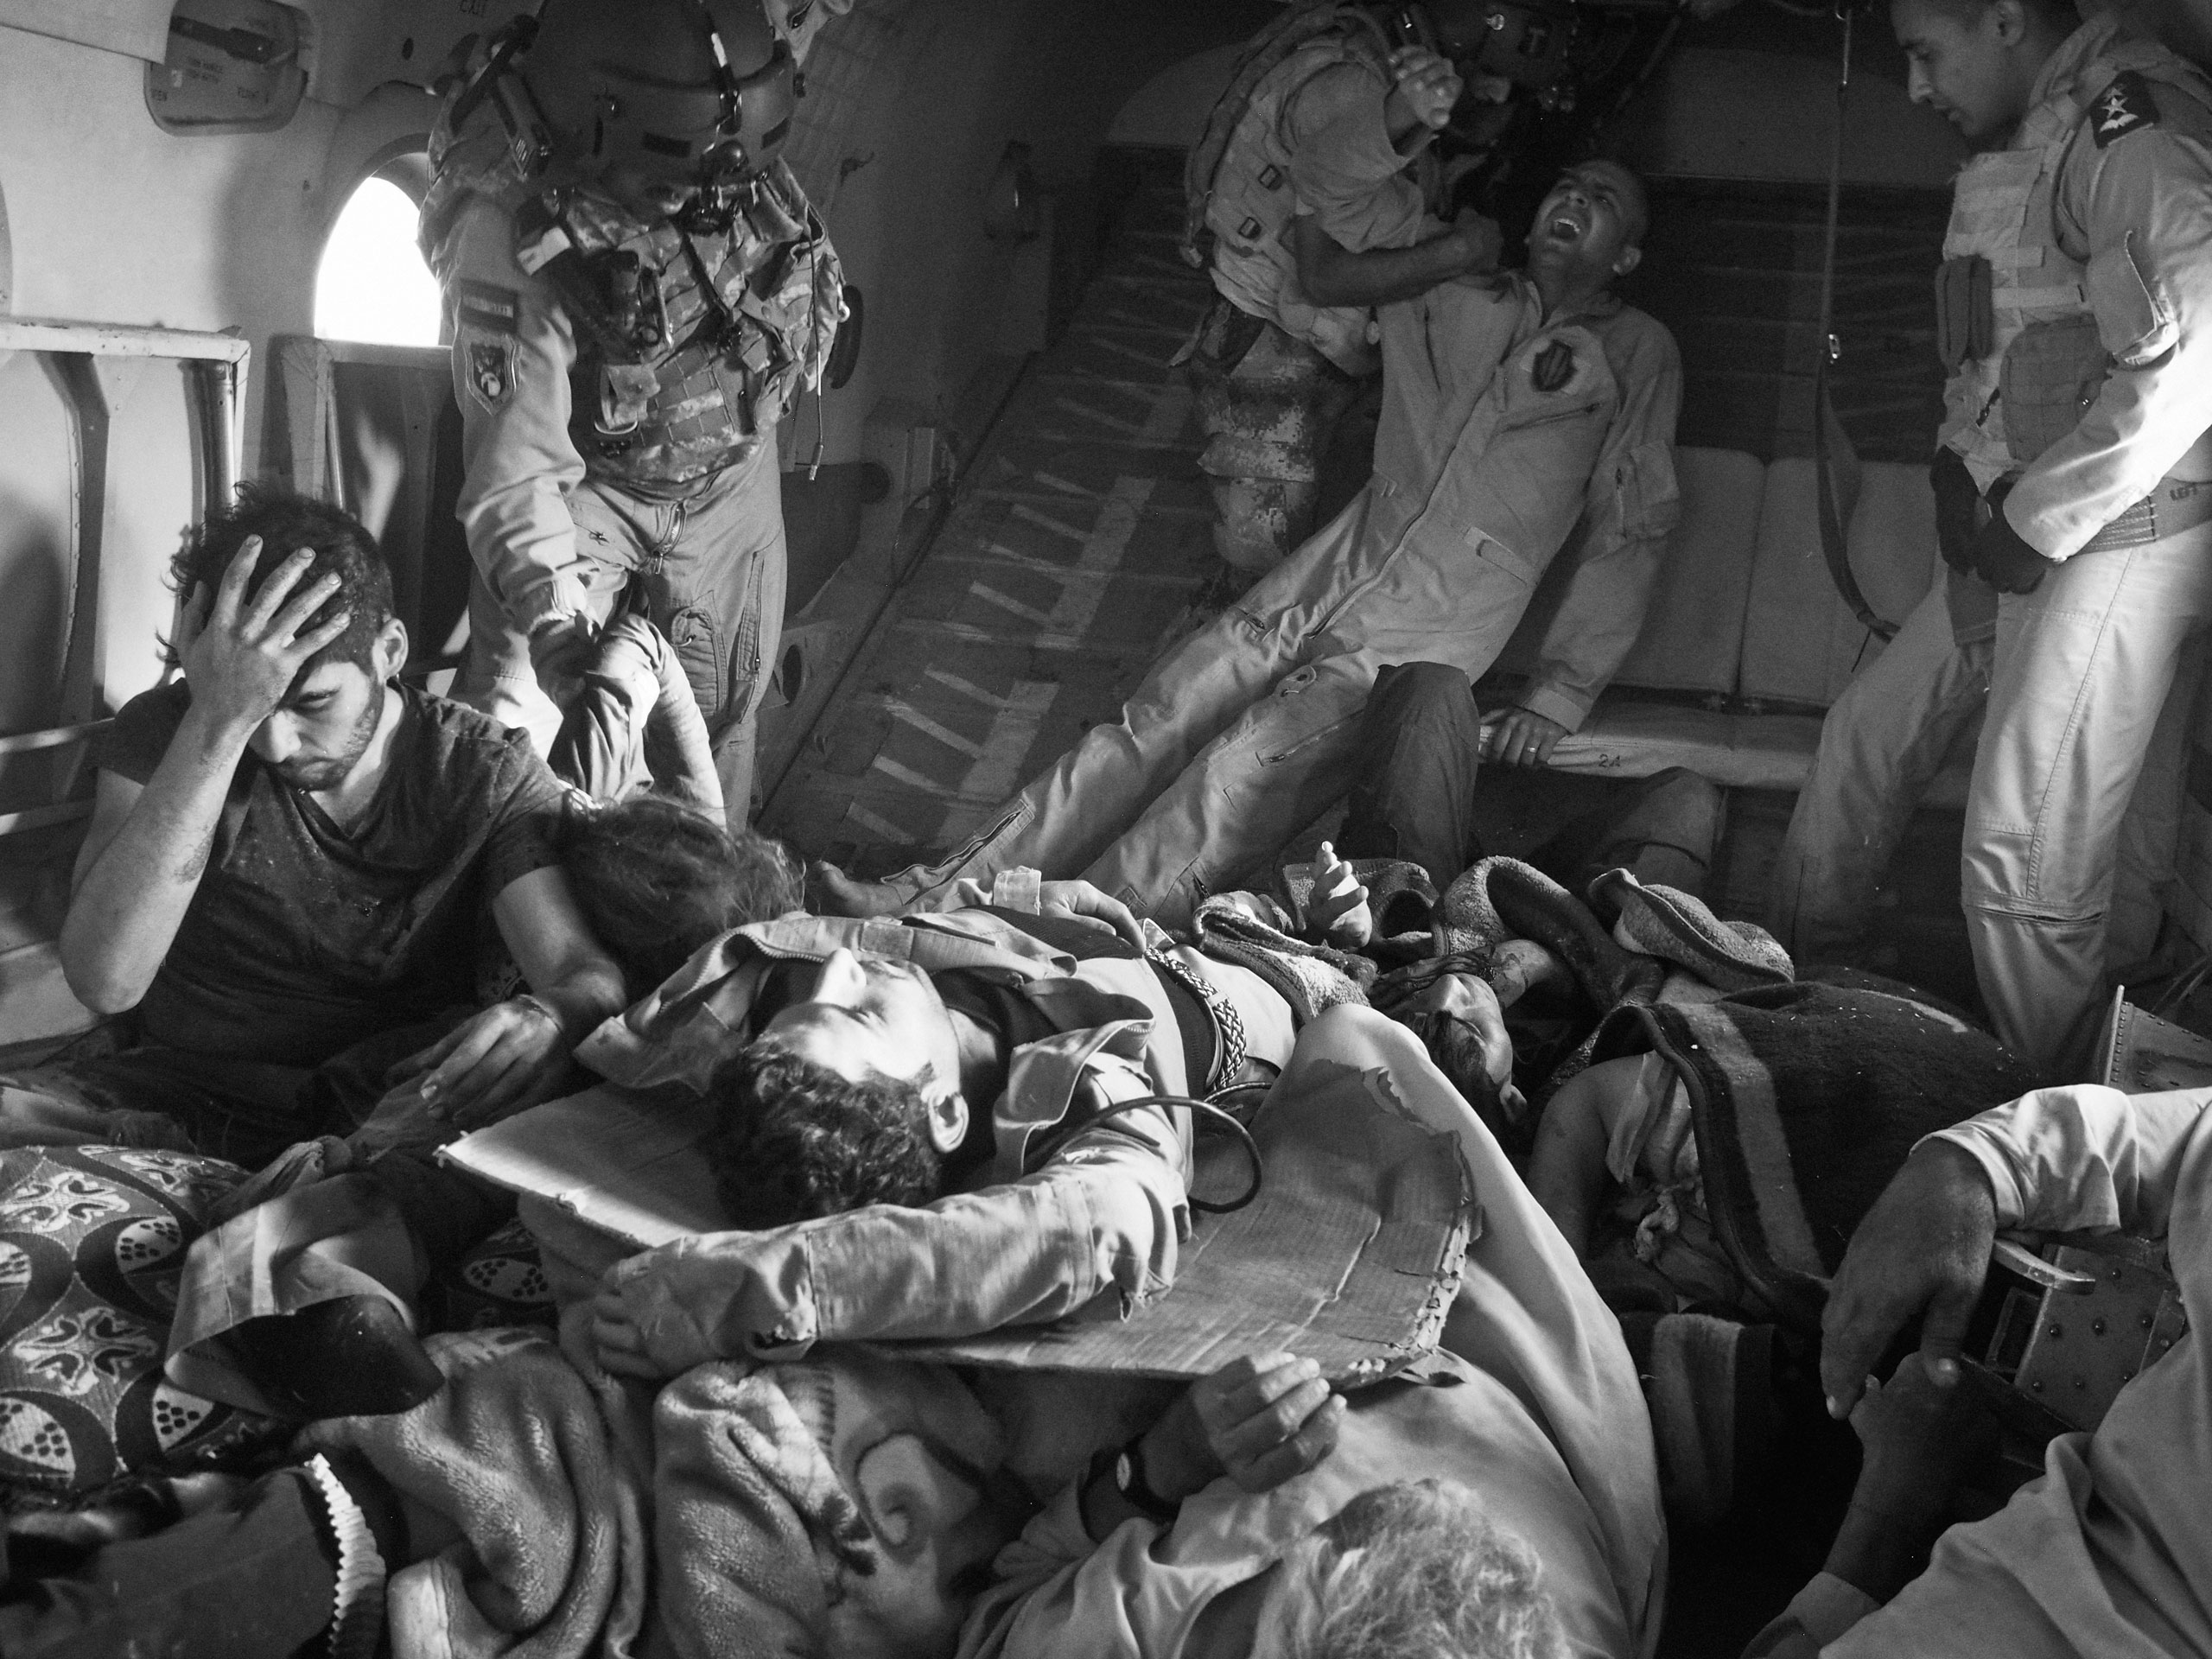 Survivors of the Sinjar crash, including Yezidis and Kurdish and Iraqi military personnel, are loaded onto a second rescue helicopter bound for Kurdish territory. The pilot killed in the crash lies under the wounded. Aug. 12, 2014.